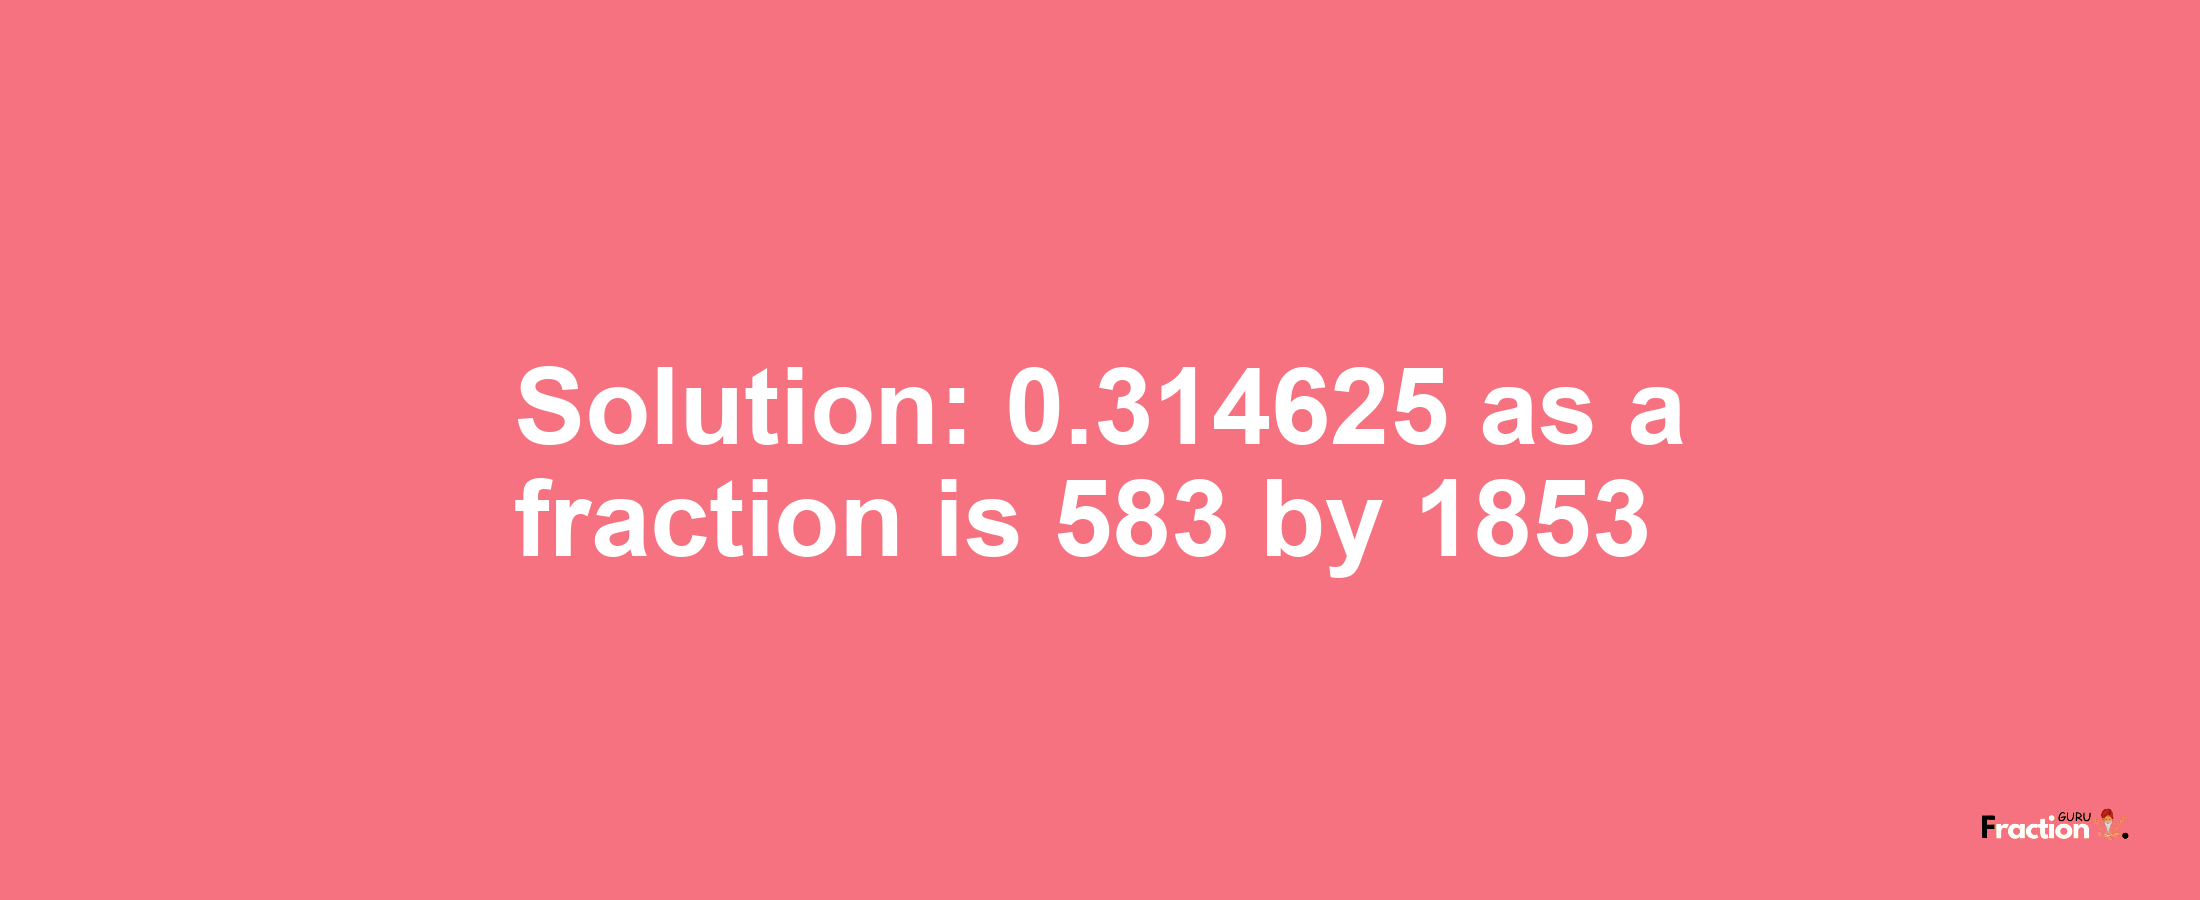 Solution:0.314625 as a fraction is 583/1853